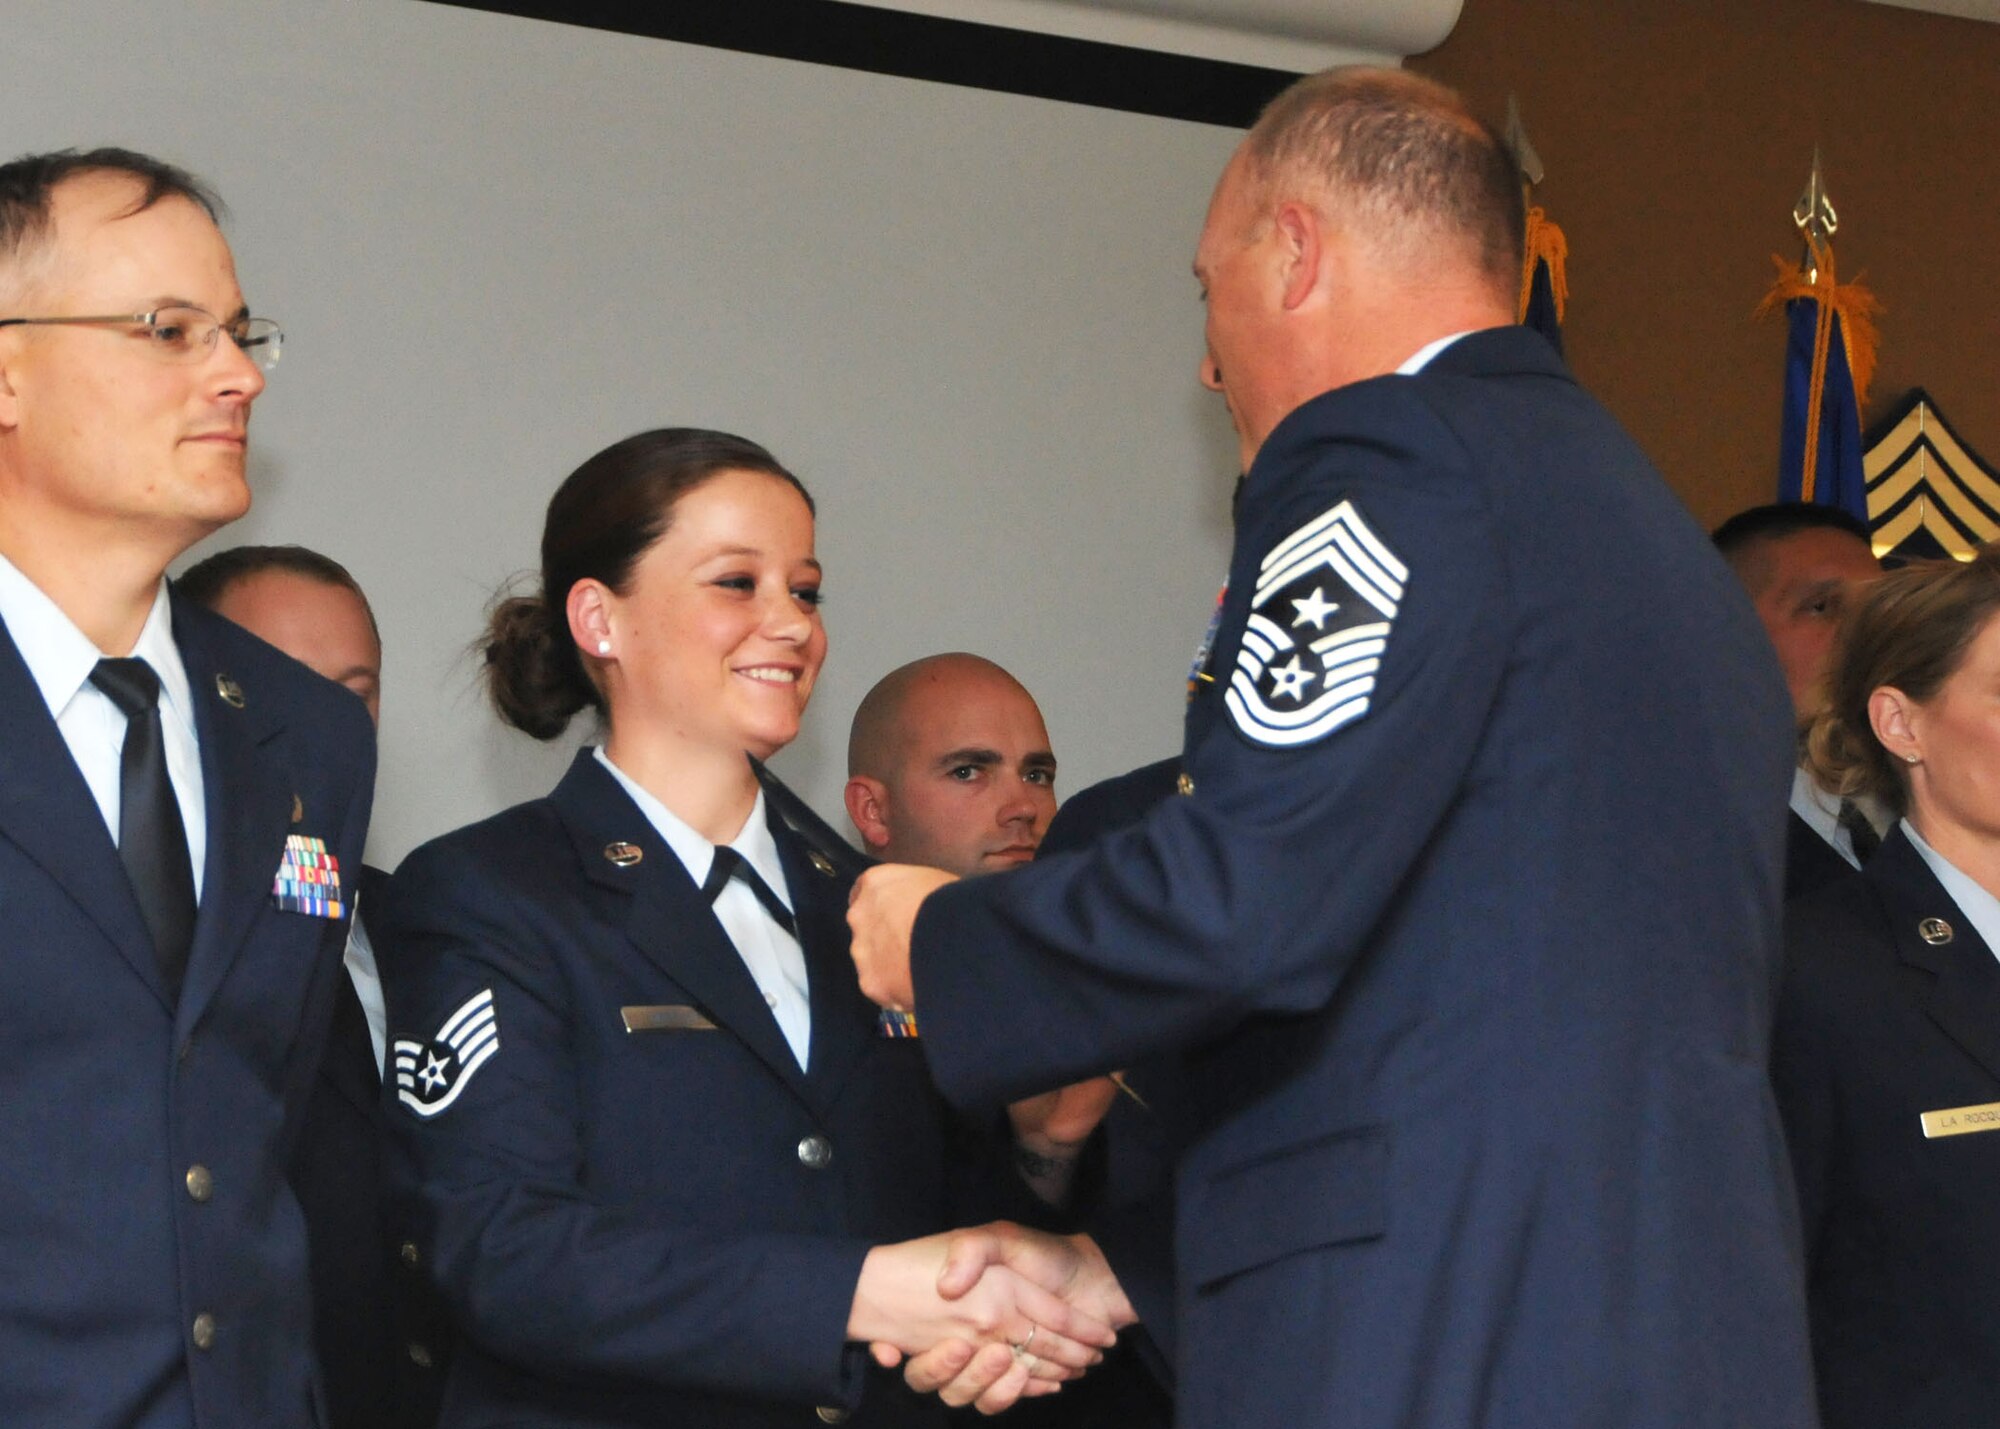 120th Command Chief Master Sgt. Timothy Huffman presents a certificate of induction to newly promoted Staff Sgt. Holly Heffley during the NCO Induction Ceremony held at the 120th Fighter Wing in Great Falls, Mont. on Nov. 4, 2013. National Guard photo/Senior Airman Nik Asmussen.